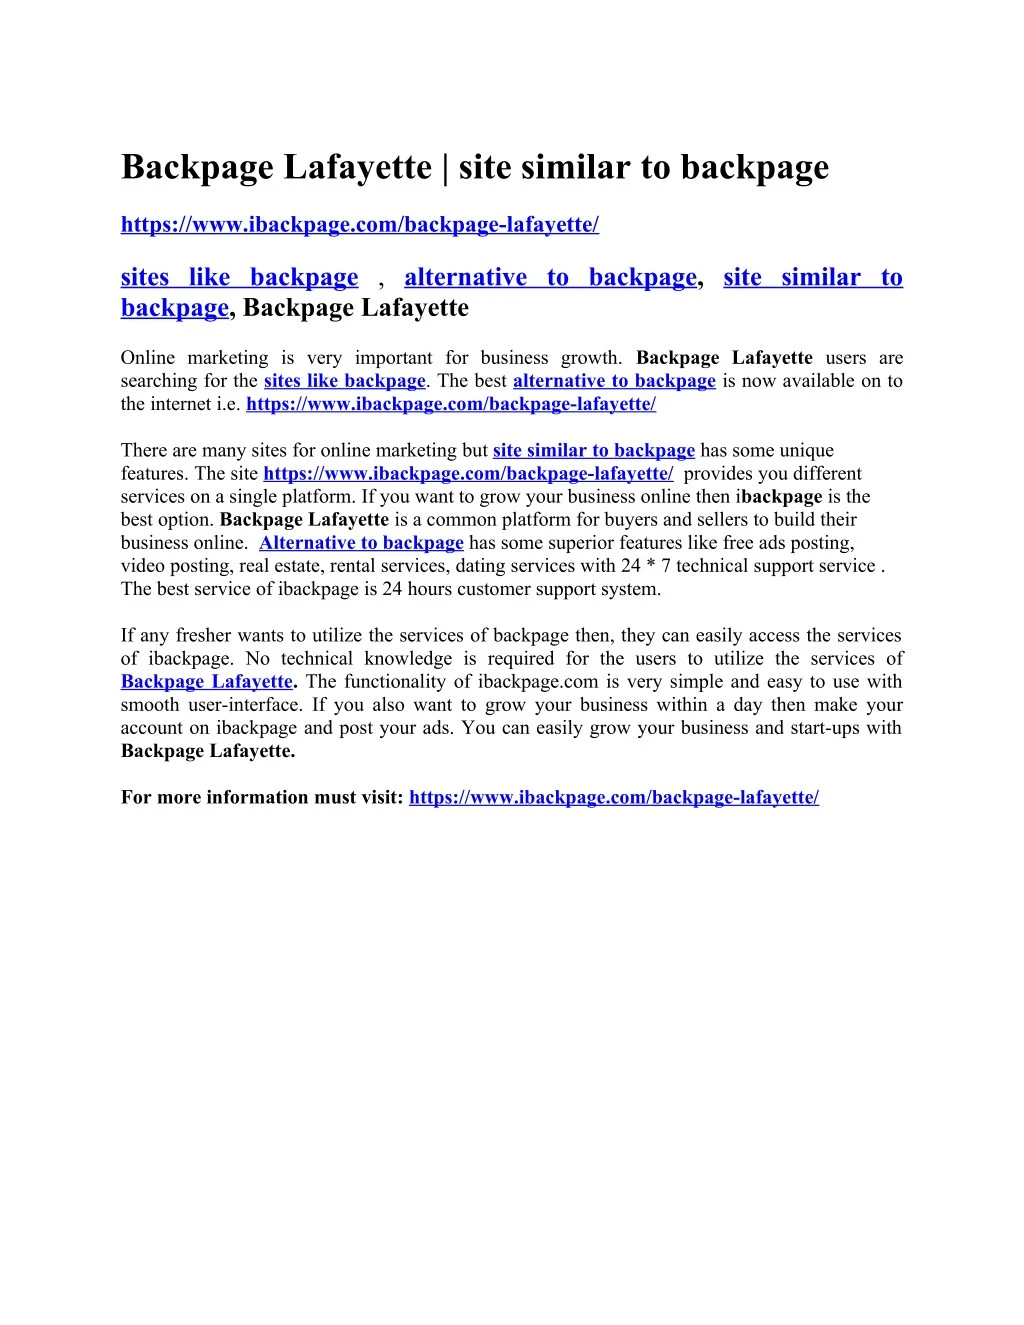 backpage lafayette site similar to backpage